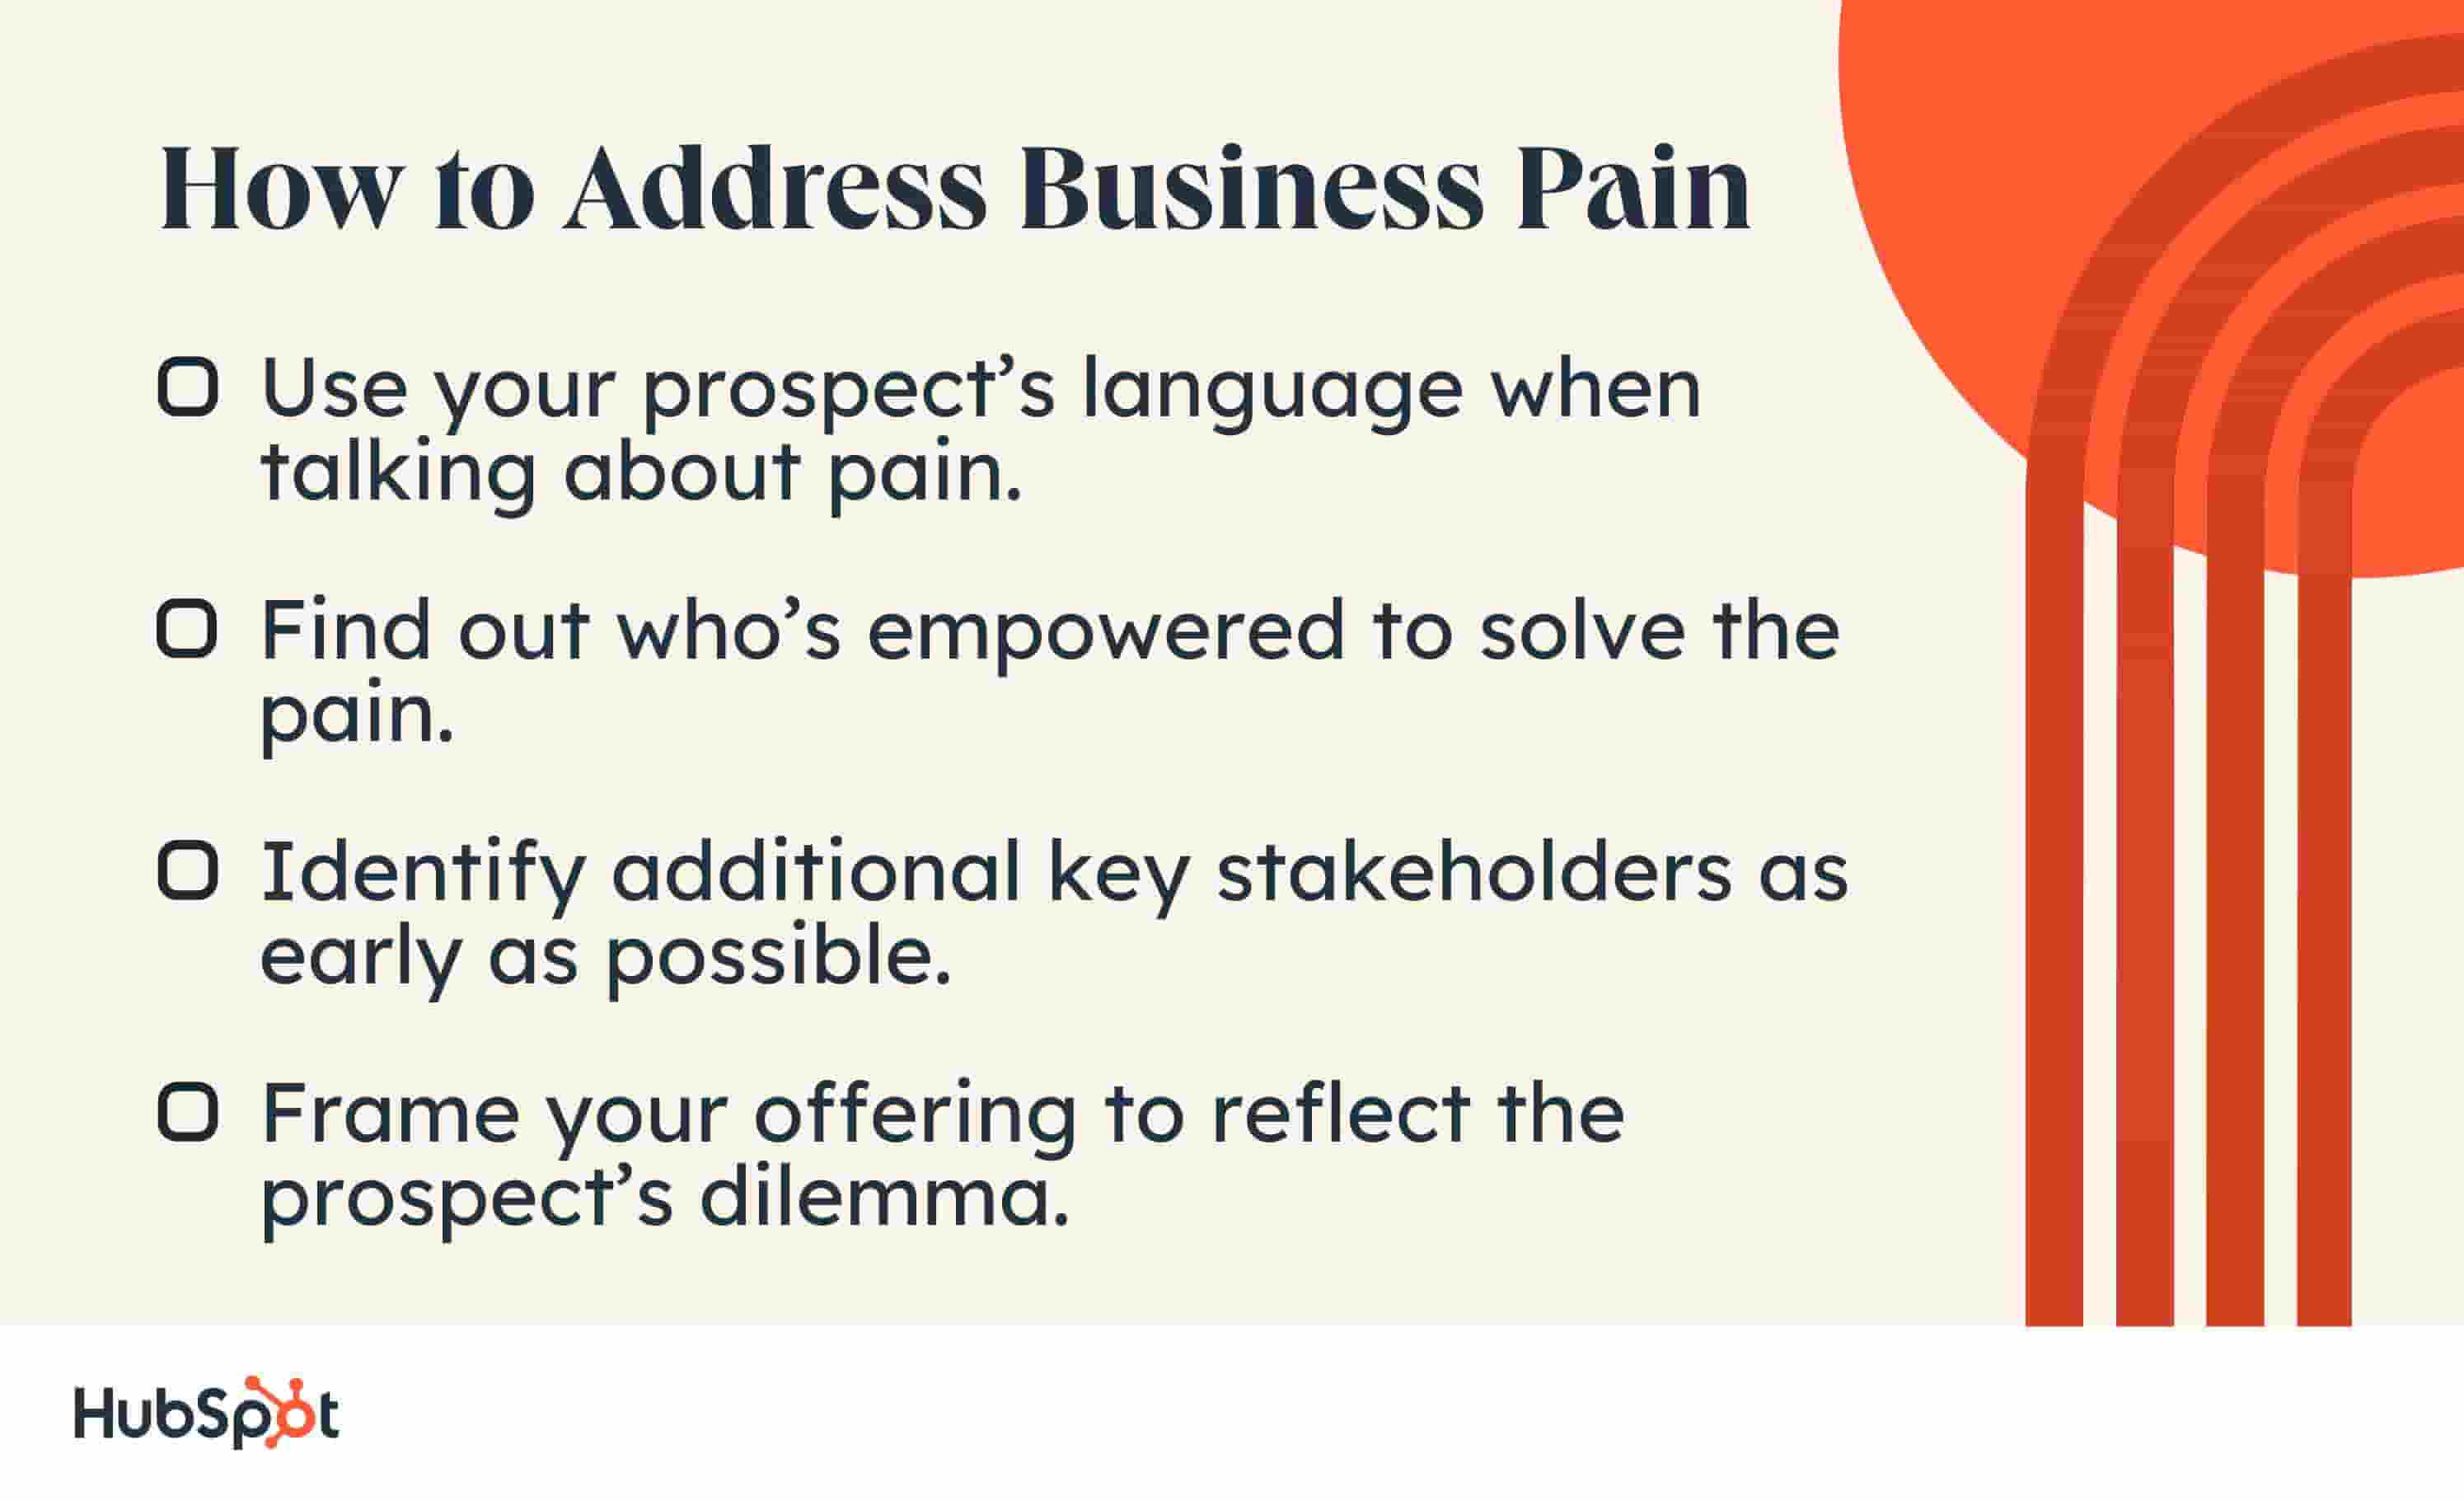 How to Address Business Pain. Use your prospect’s language when talking about pain. Find out who’s empowered to solve the pain. Identify additional key stakeholders as early as possible. Frame your offering to reflect the prospect’s dilemma.